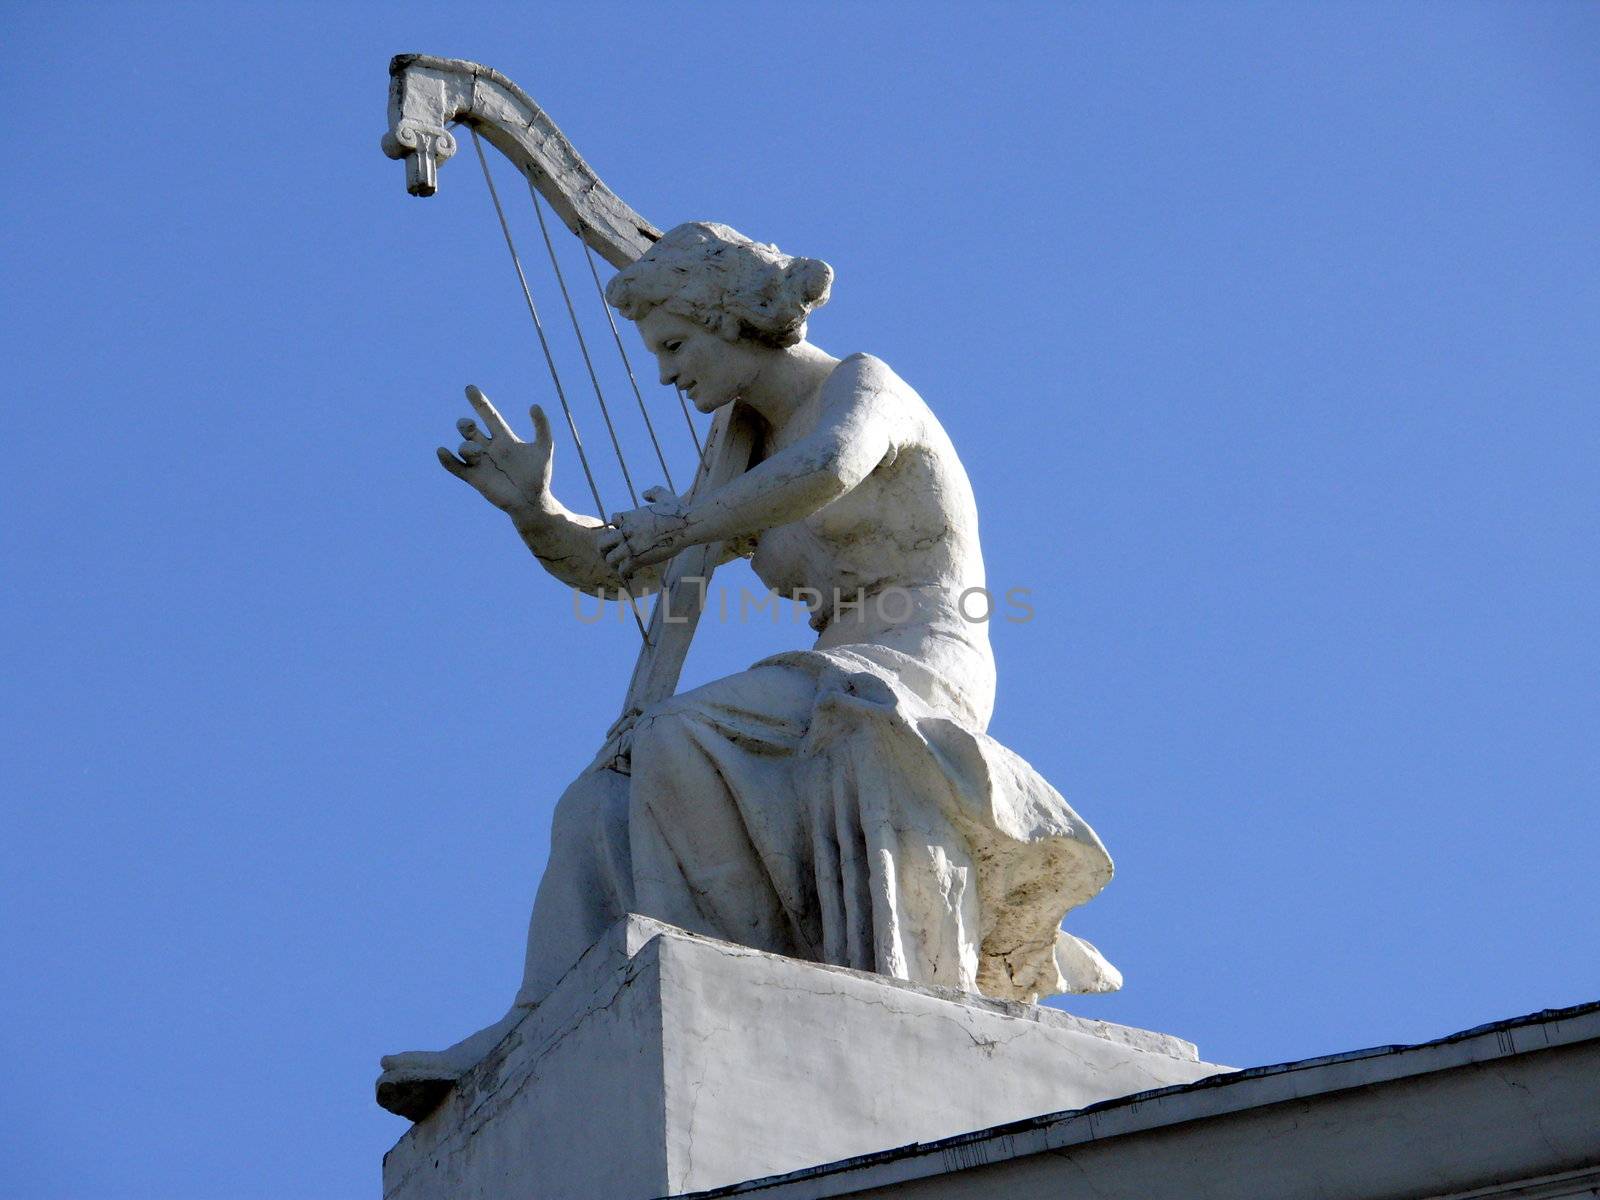 Sculpture of woman with harp in the roof